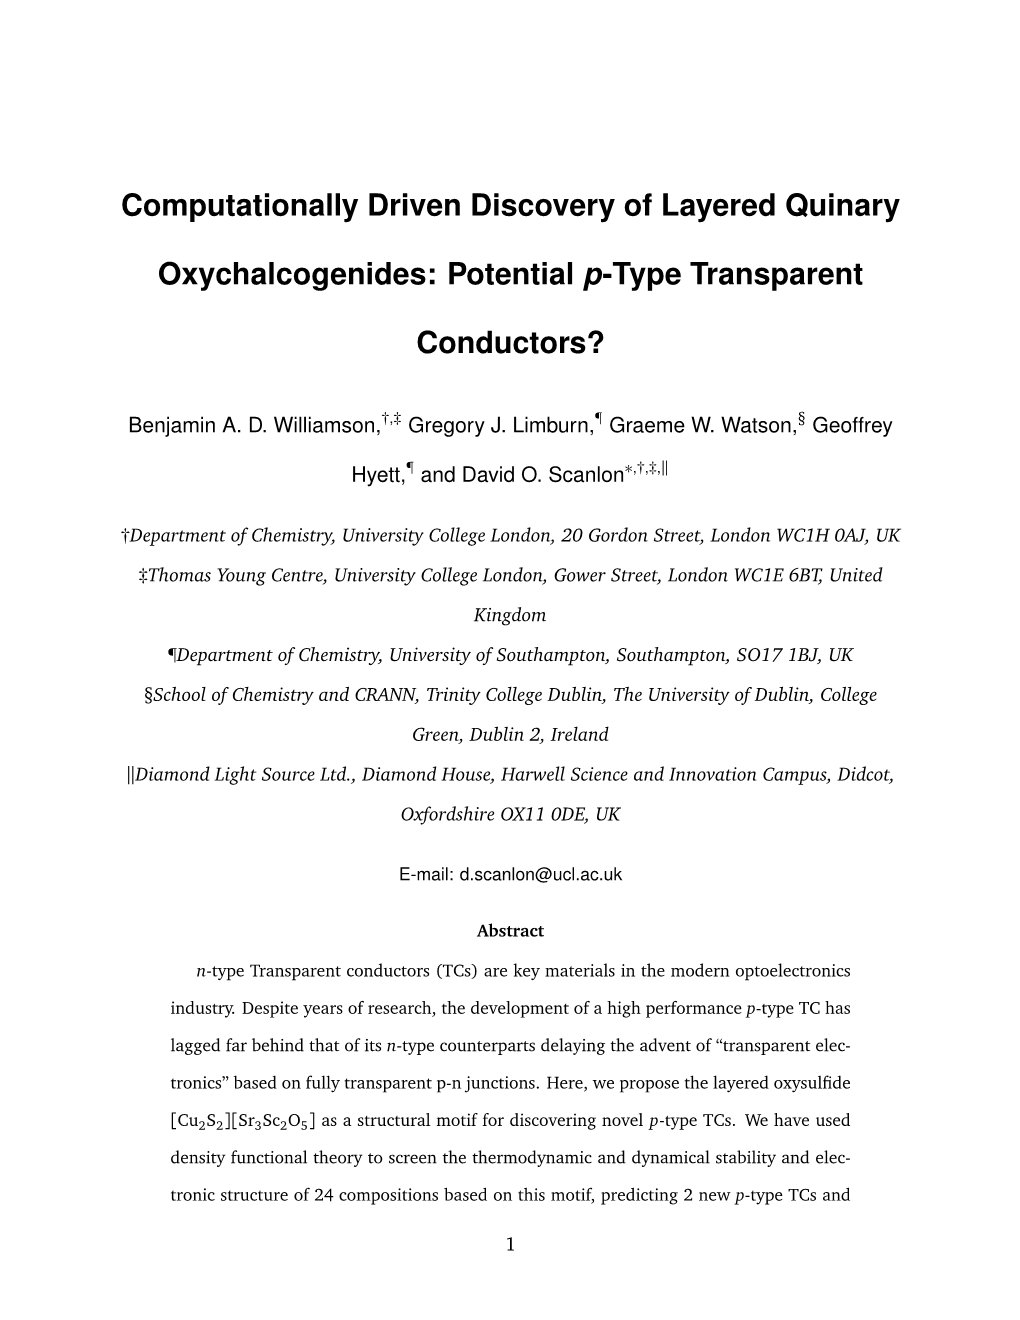 Computationally Driven Discovery of Layered Quinary Oxychalcogenides